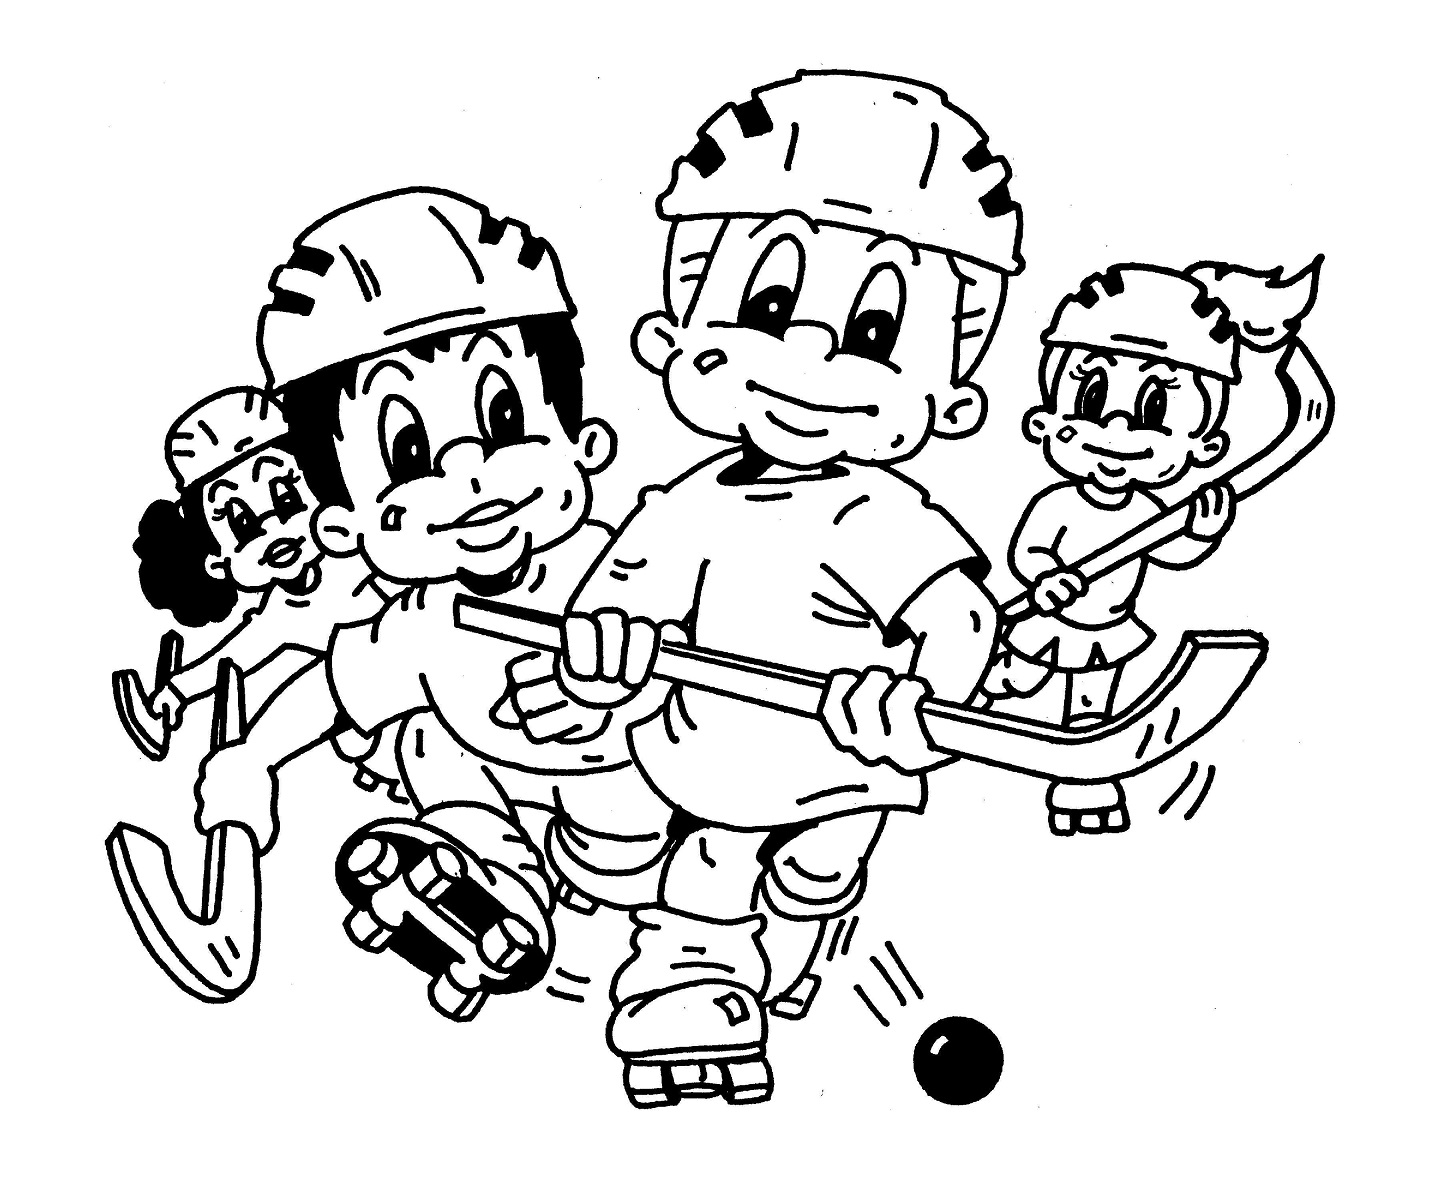 hockey coloring pages